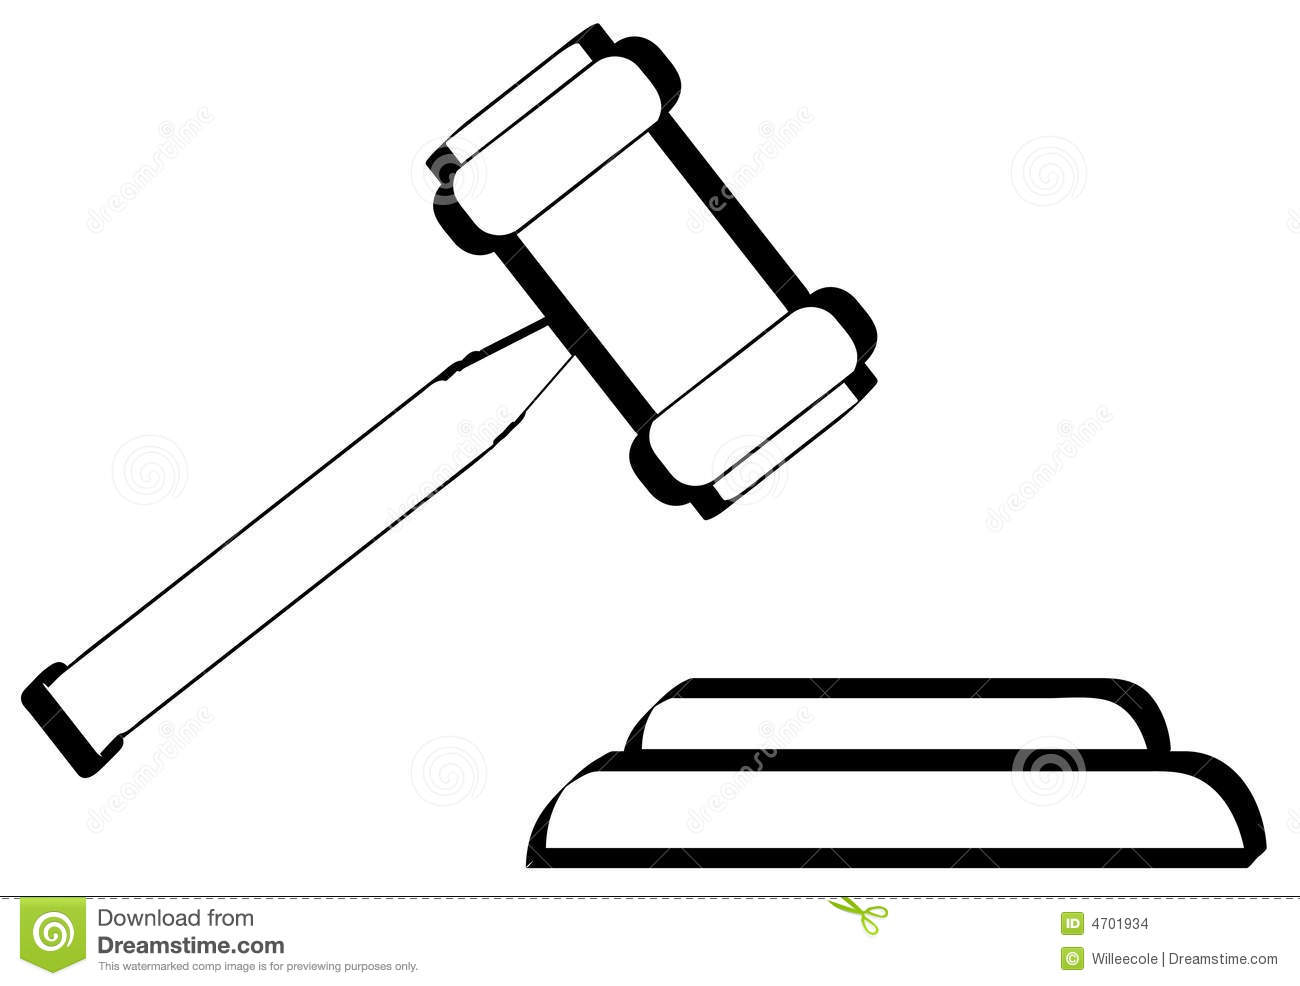 Outline Of Gavel   Hammer Of Judge Or Auctioneer   Vector 